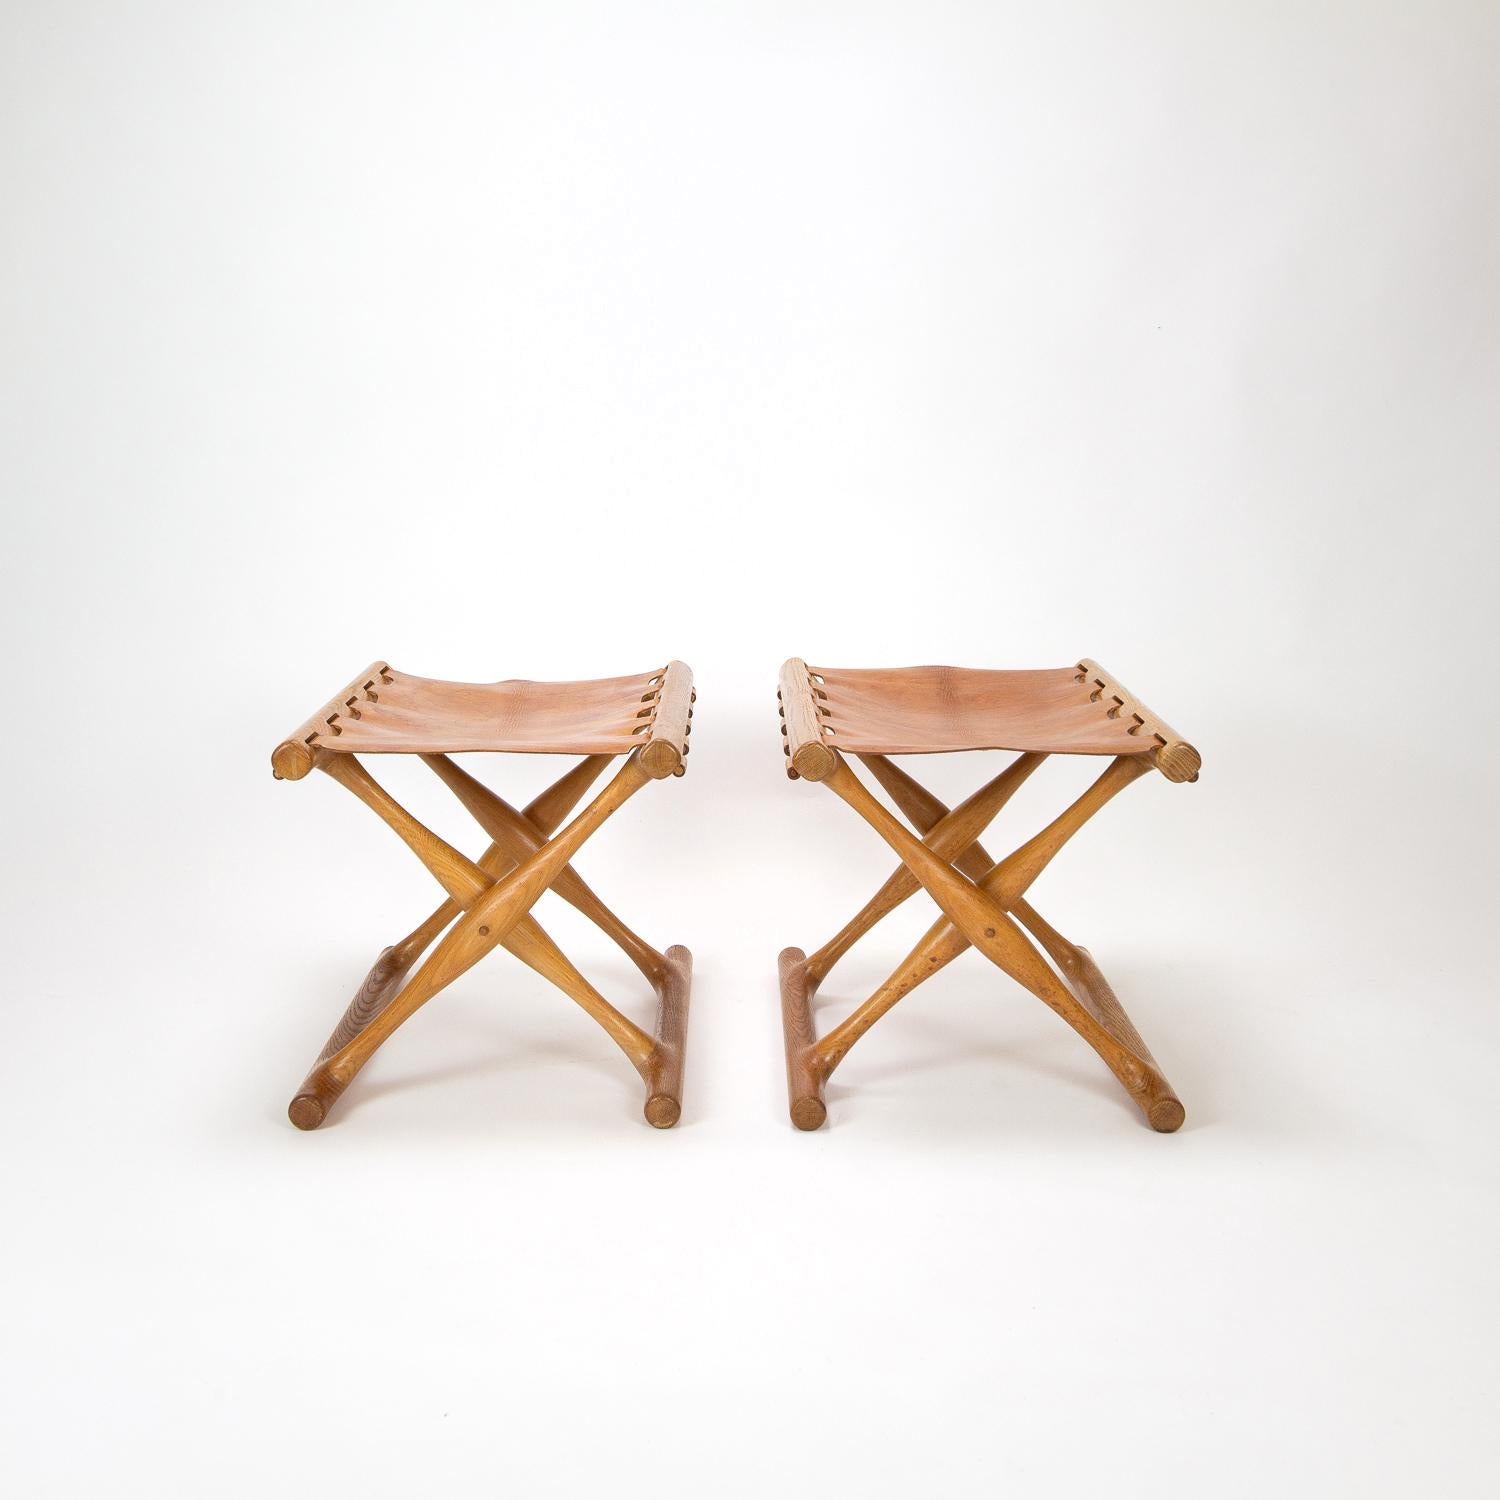 An original pair of Gudhøj folding PH43 Egyptian stools by Poul Hundevad for Vamdrup, Denmark, 1960s. Based on a bronze age folding stool found at Guldhøj in Denmark. Great patina to the leather and oak.